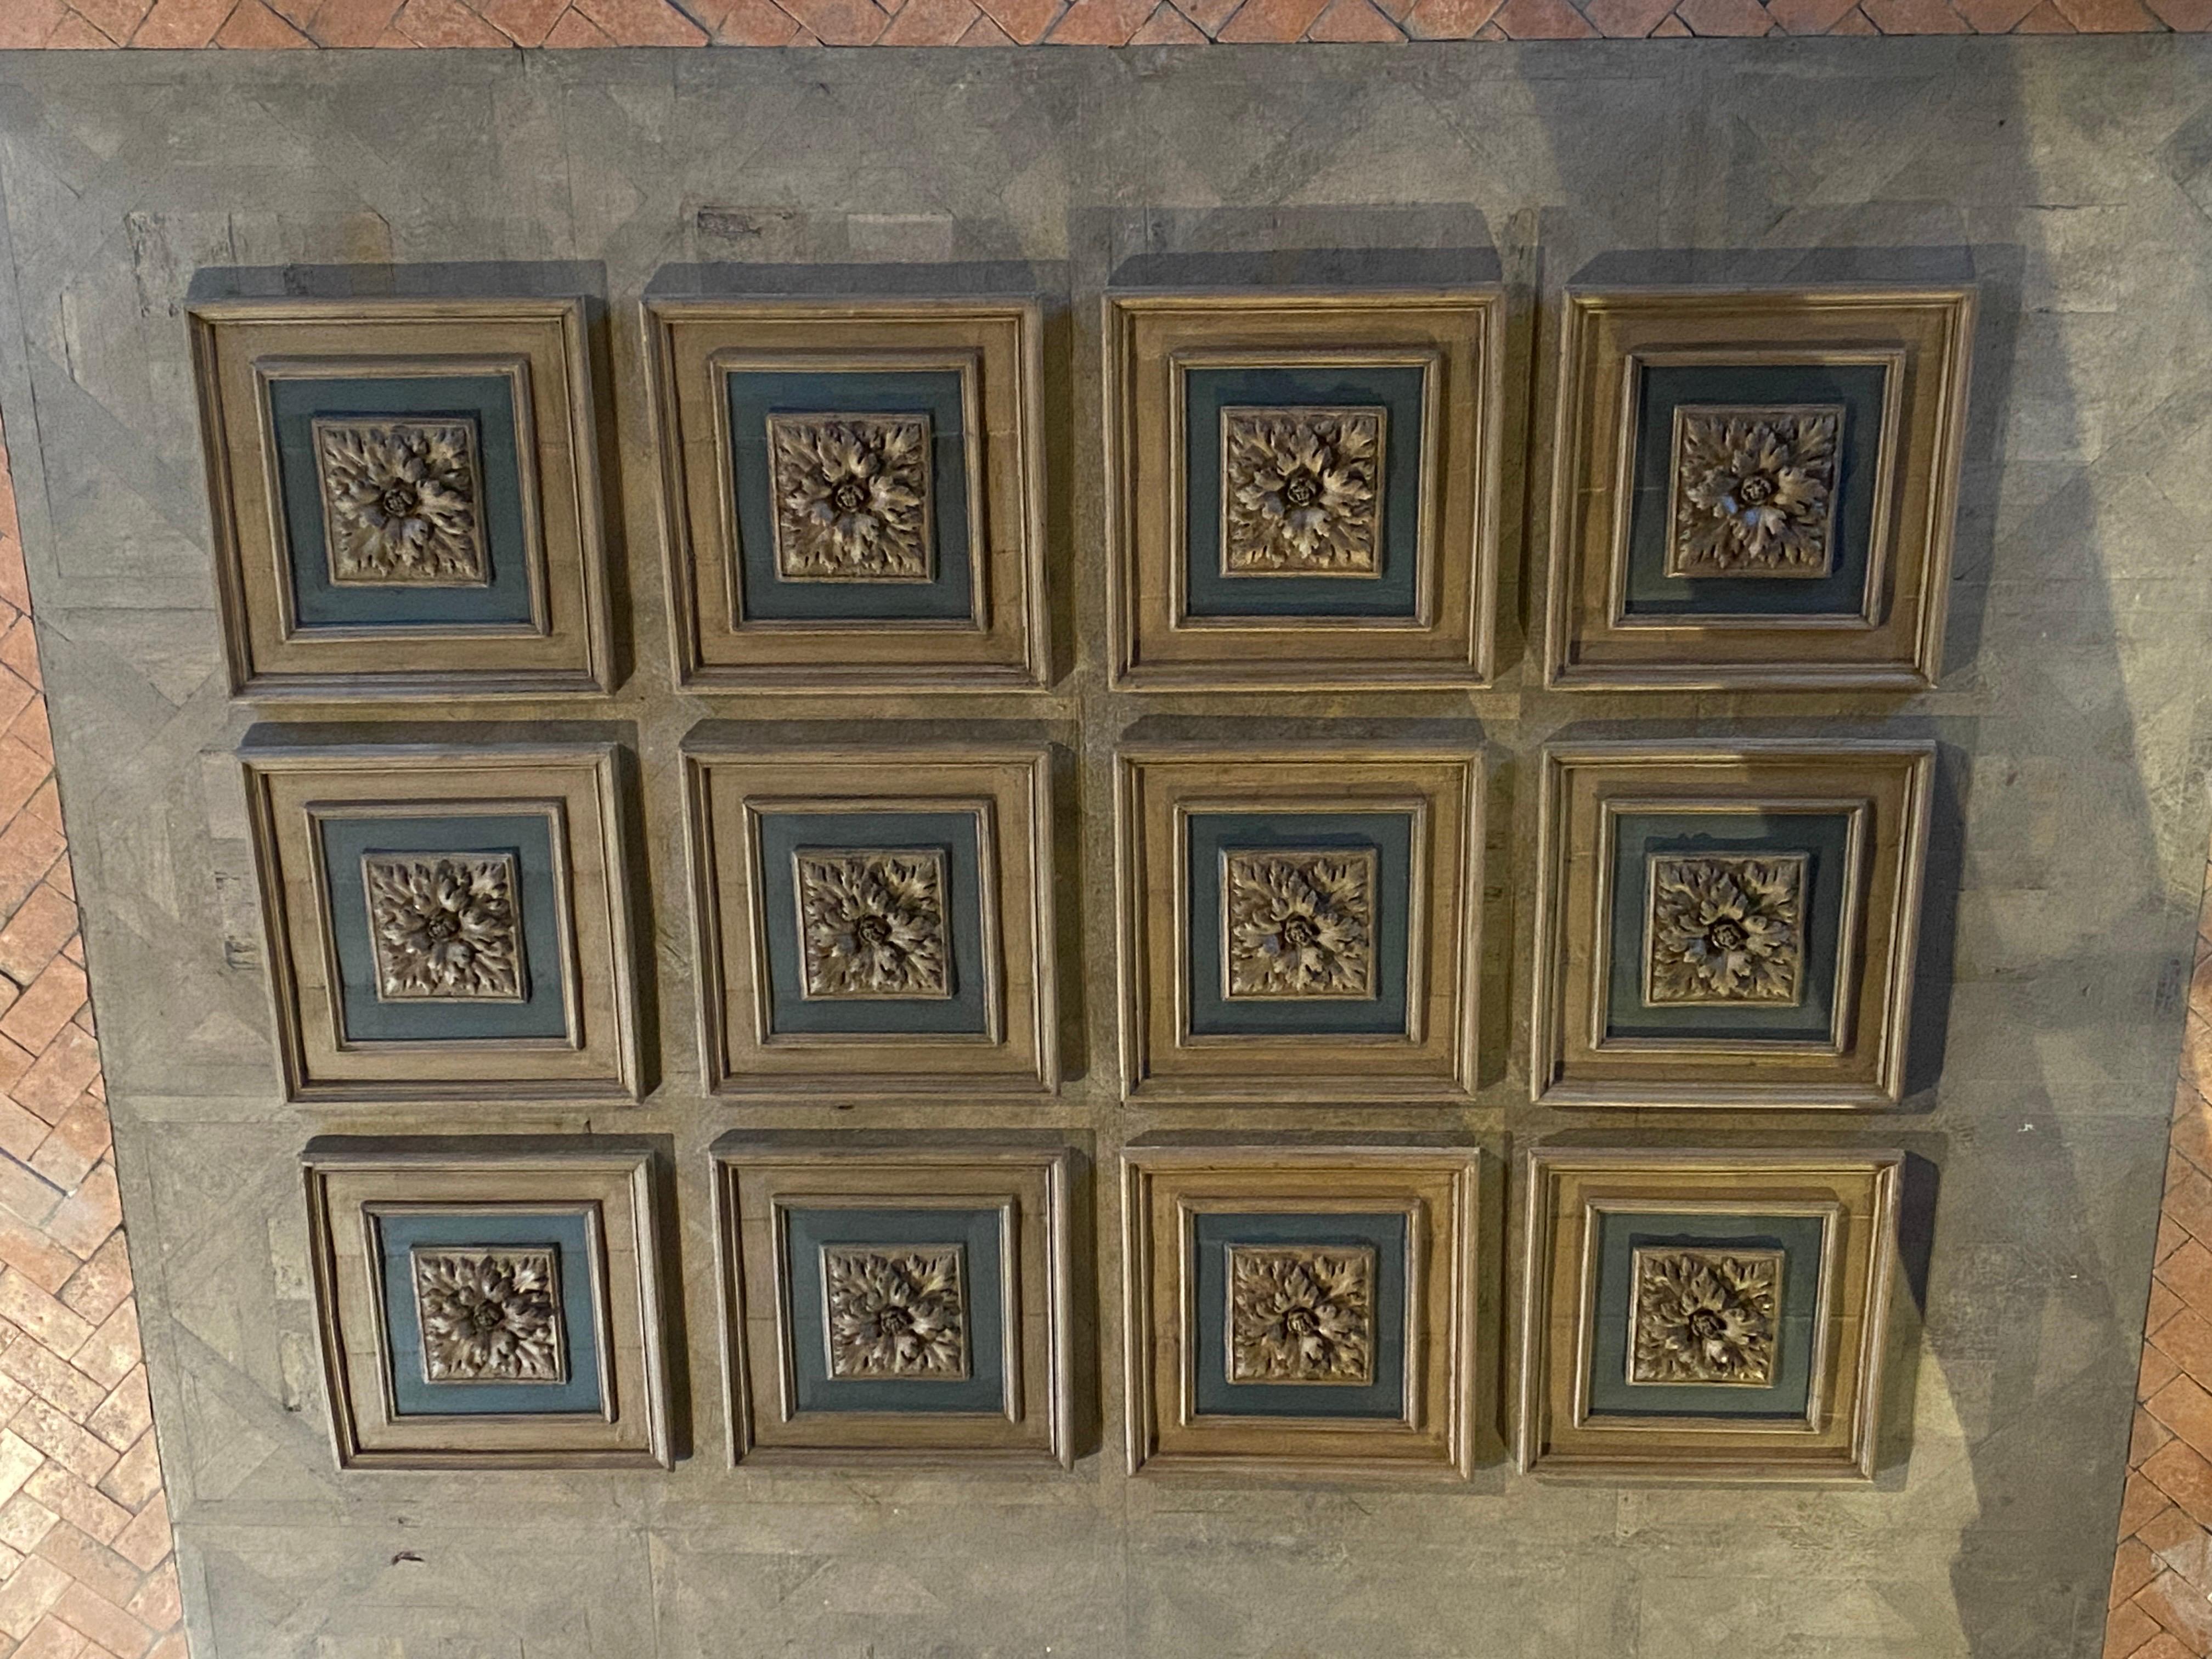 magnificent and very rare ube slabs old residence from the south of France dating from the 19th century in polychrome wood set of 12 coffered ceiling tiles in polychrome woodwork with plaster rosette in perfect condition the slabs measure 70 cmx 74